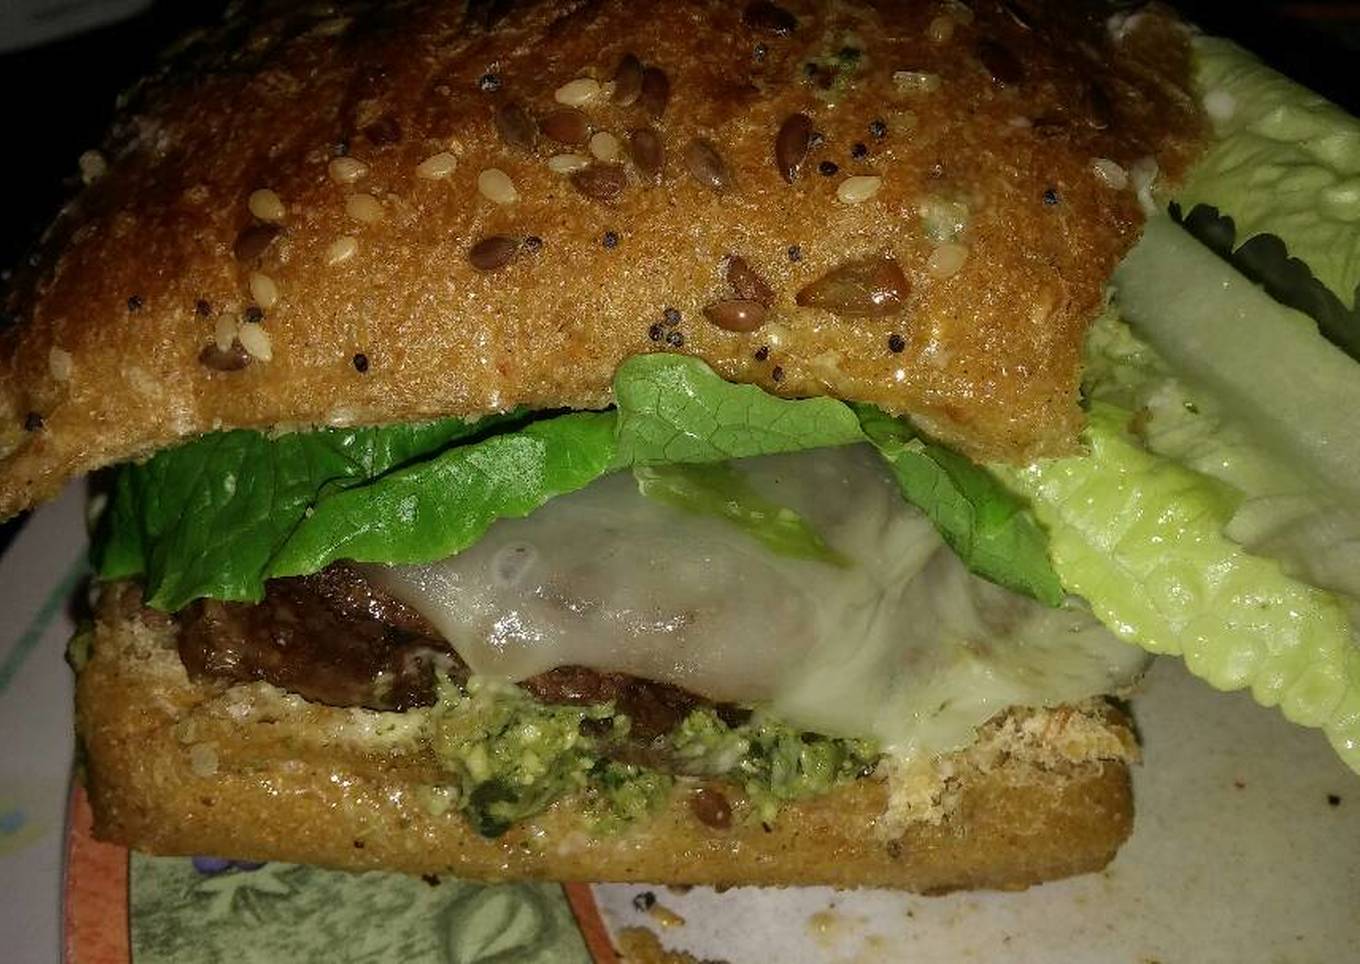 michaels flg finger licking good angus beef and basil pesto cheeseburger with provolone and sun dried tomatoes